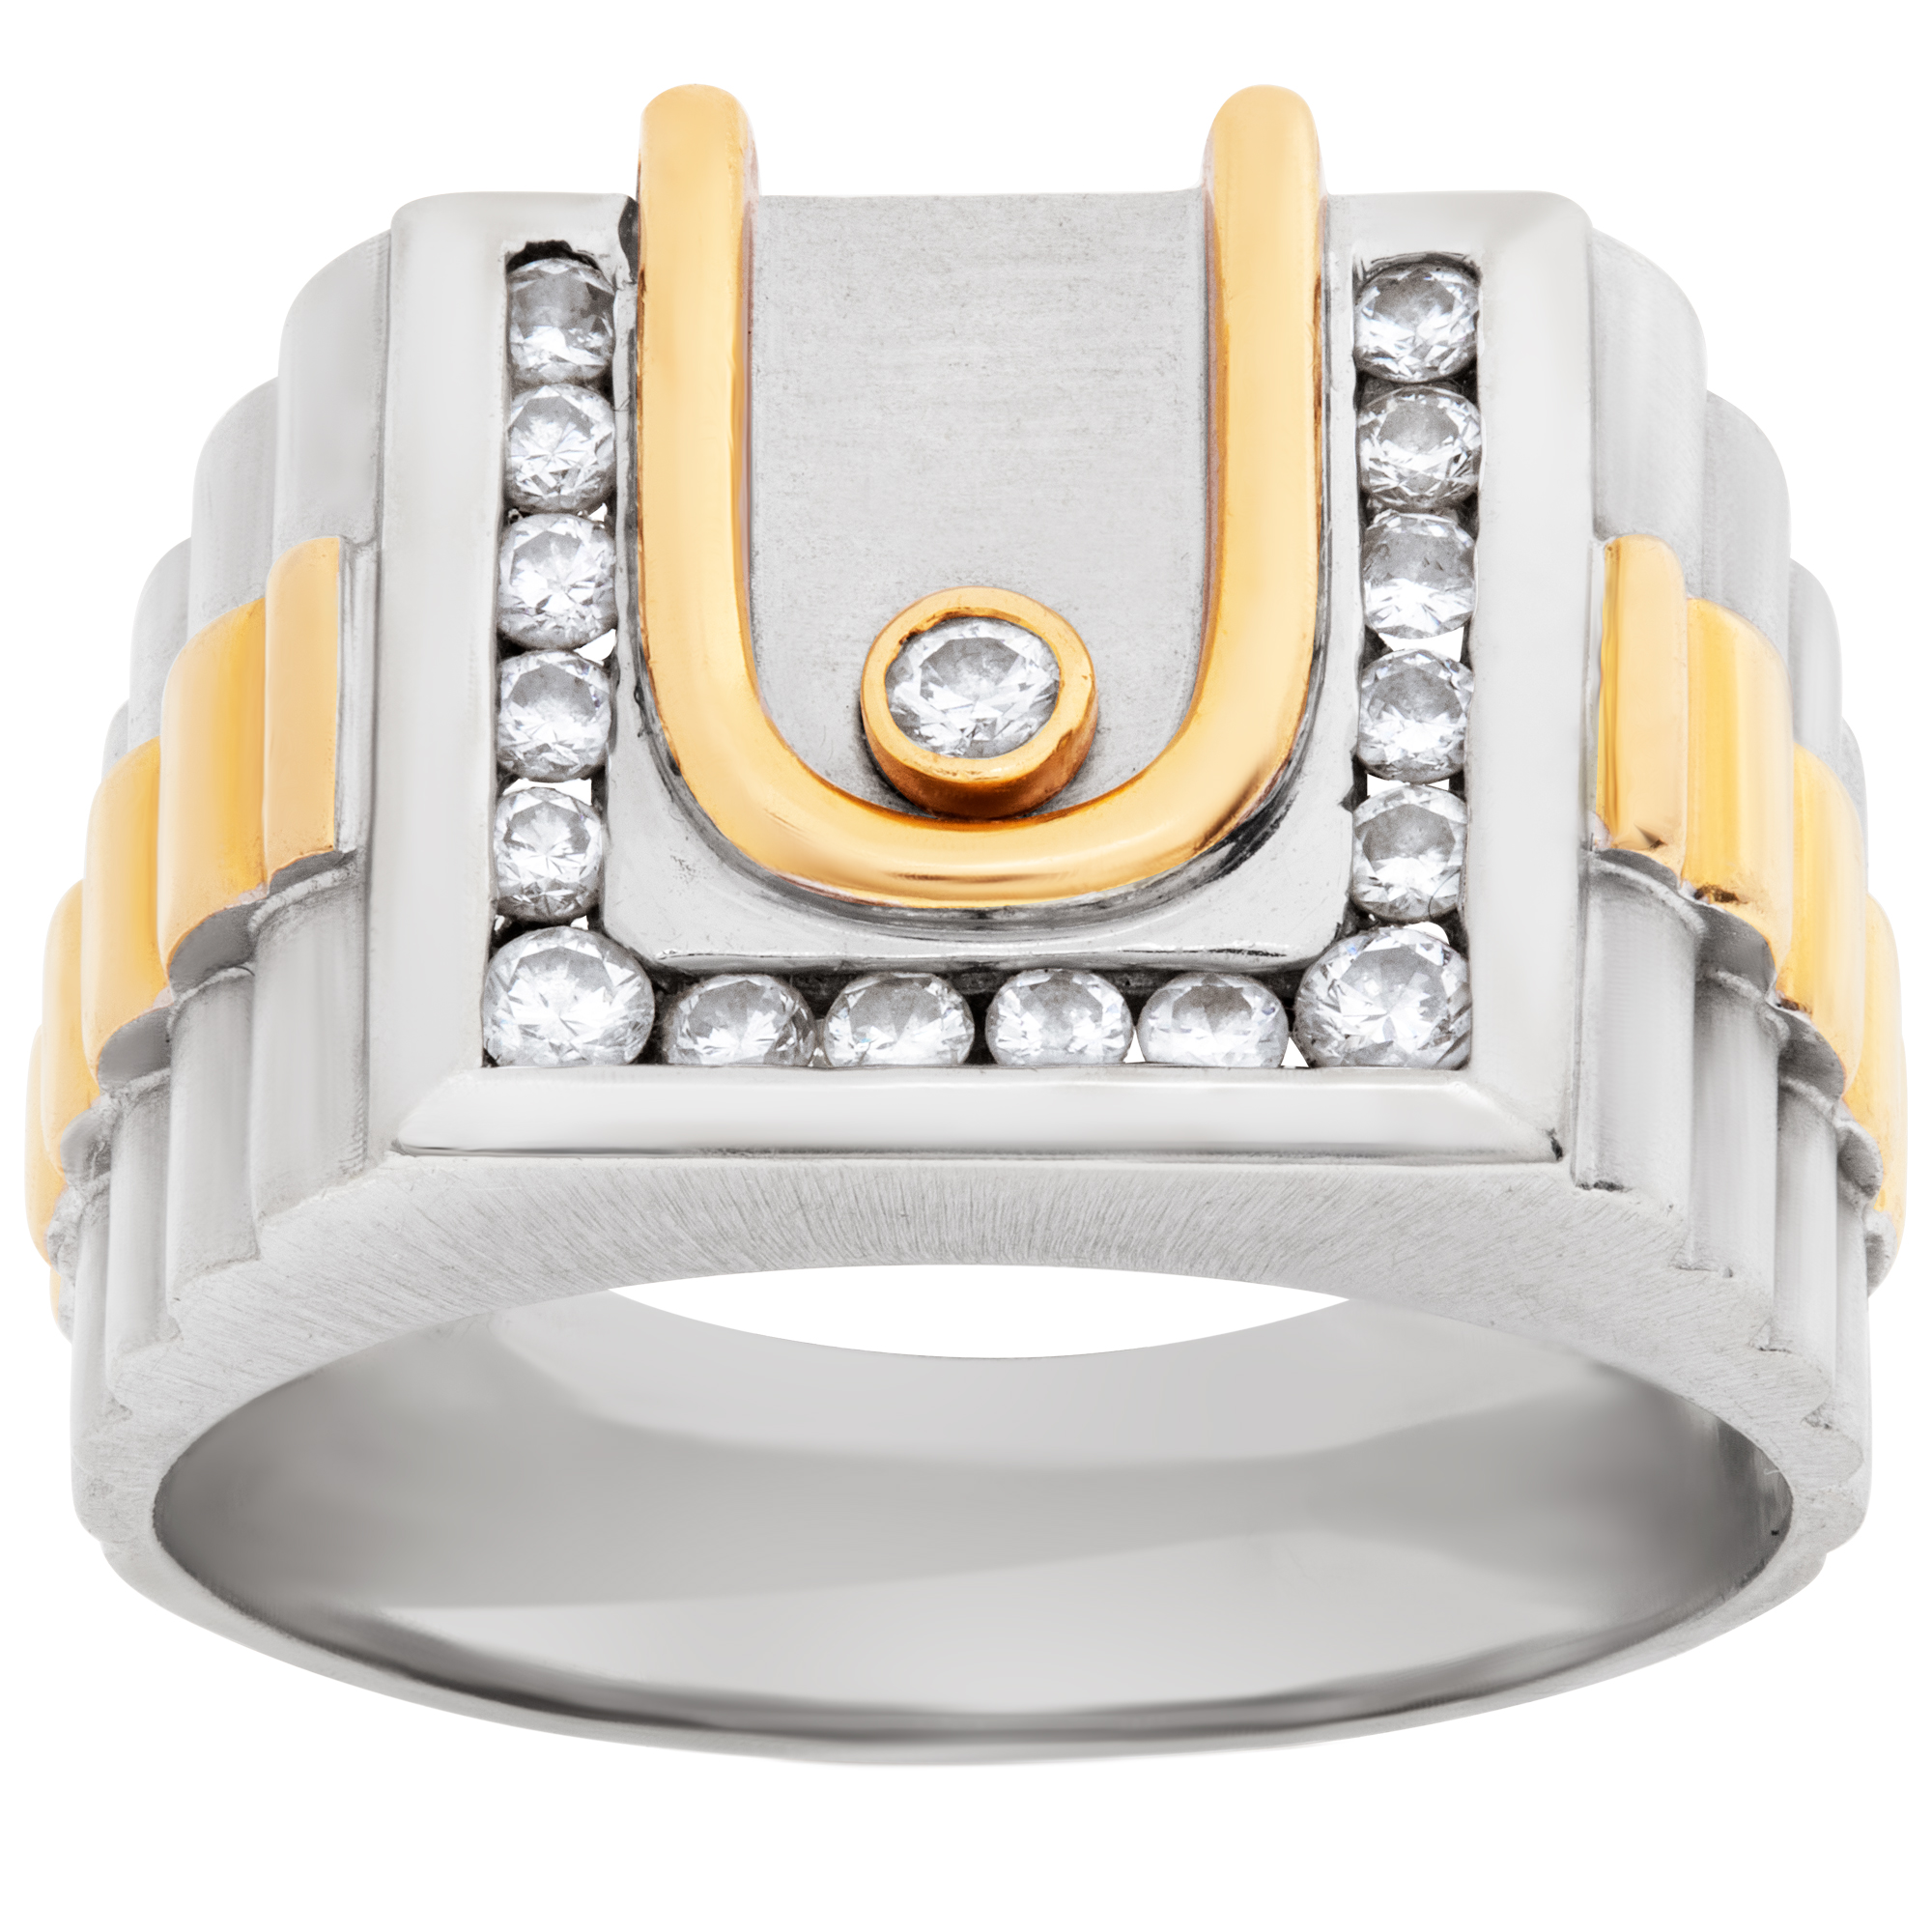 Men's ring in 18k with diamond accents image 1